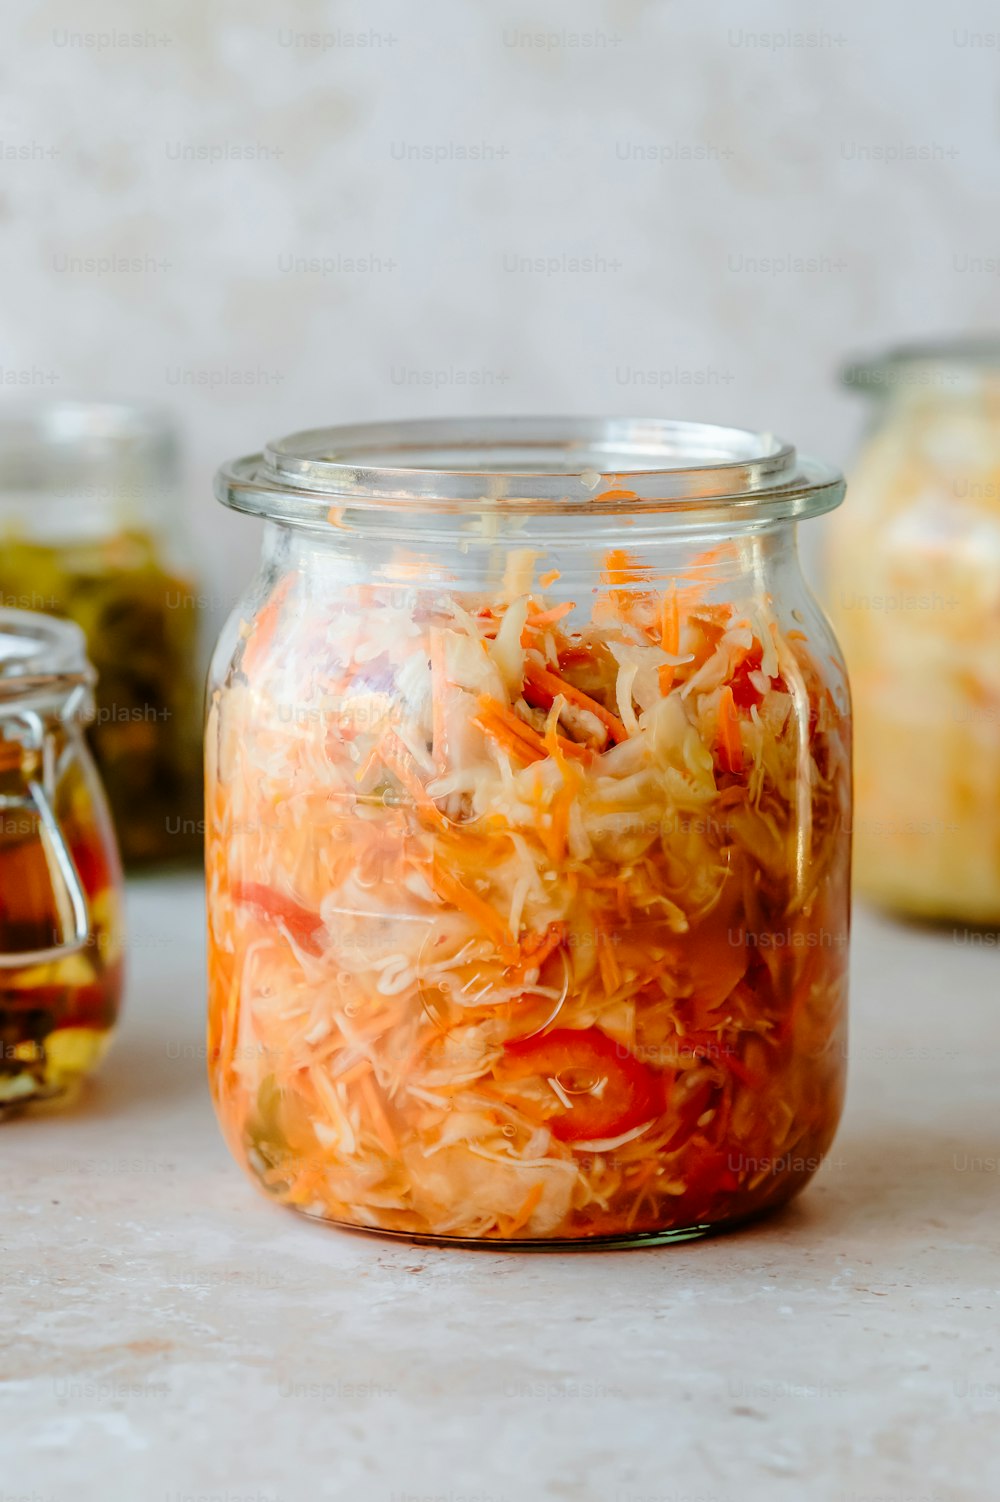 a jar filled with shredded carrots next to jars of pickles